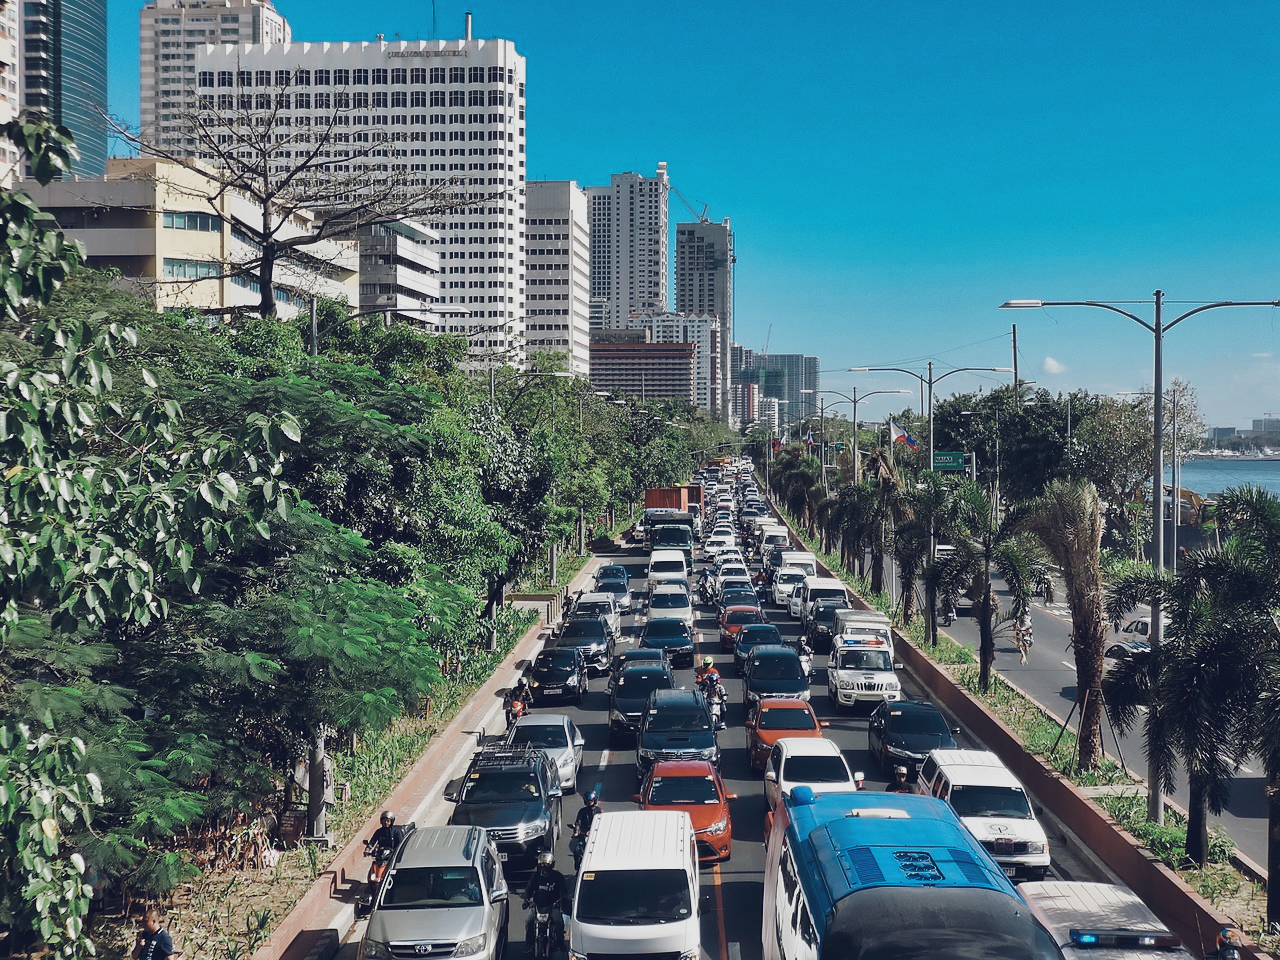 Chaotic traffic in Manila makes expats wonder, is the Philippines safe to visit